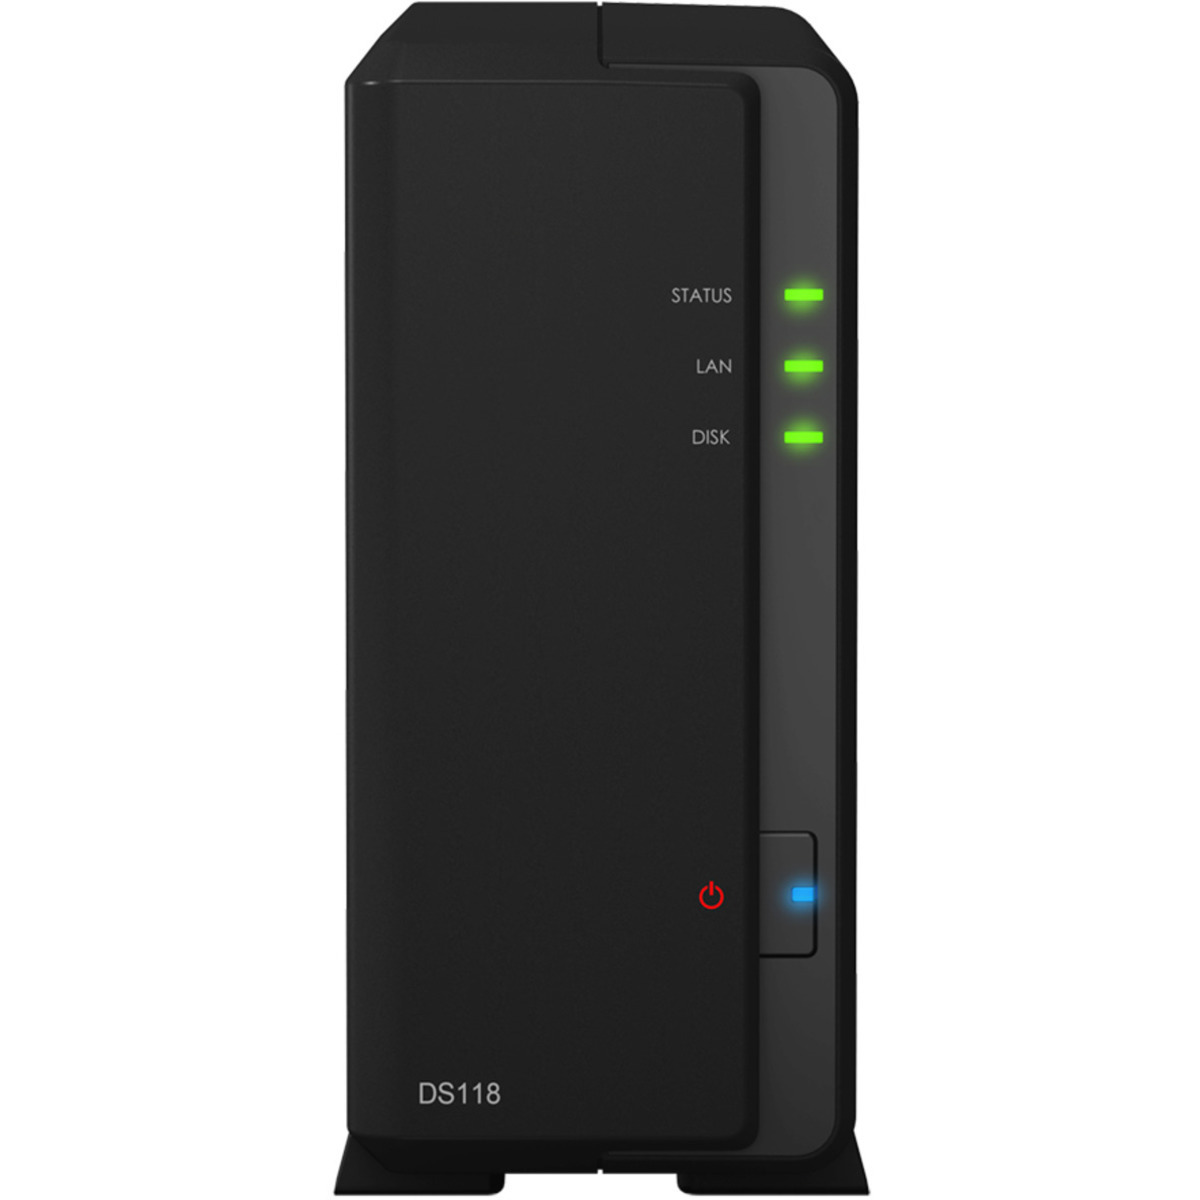 buy $1174 Synology DiskStation DS118 8tb Desktop NAS - Network Attached Storage Device 1x8000gb Samsung 870 QVO MZ-77Q8T0 2.5 SATA 6Gb/s SSD CONSUMER Class Drives Installed - Burn-In Tested - nas headquarters buy network attached storage server device das new raid-5 free shipping usa christmas new year holiday sale DiskStation DS118